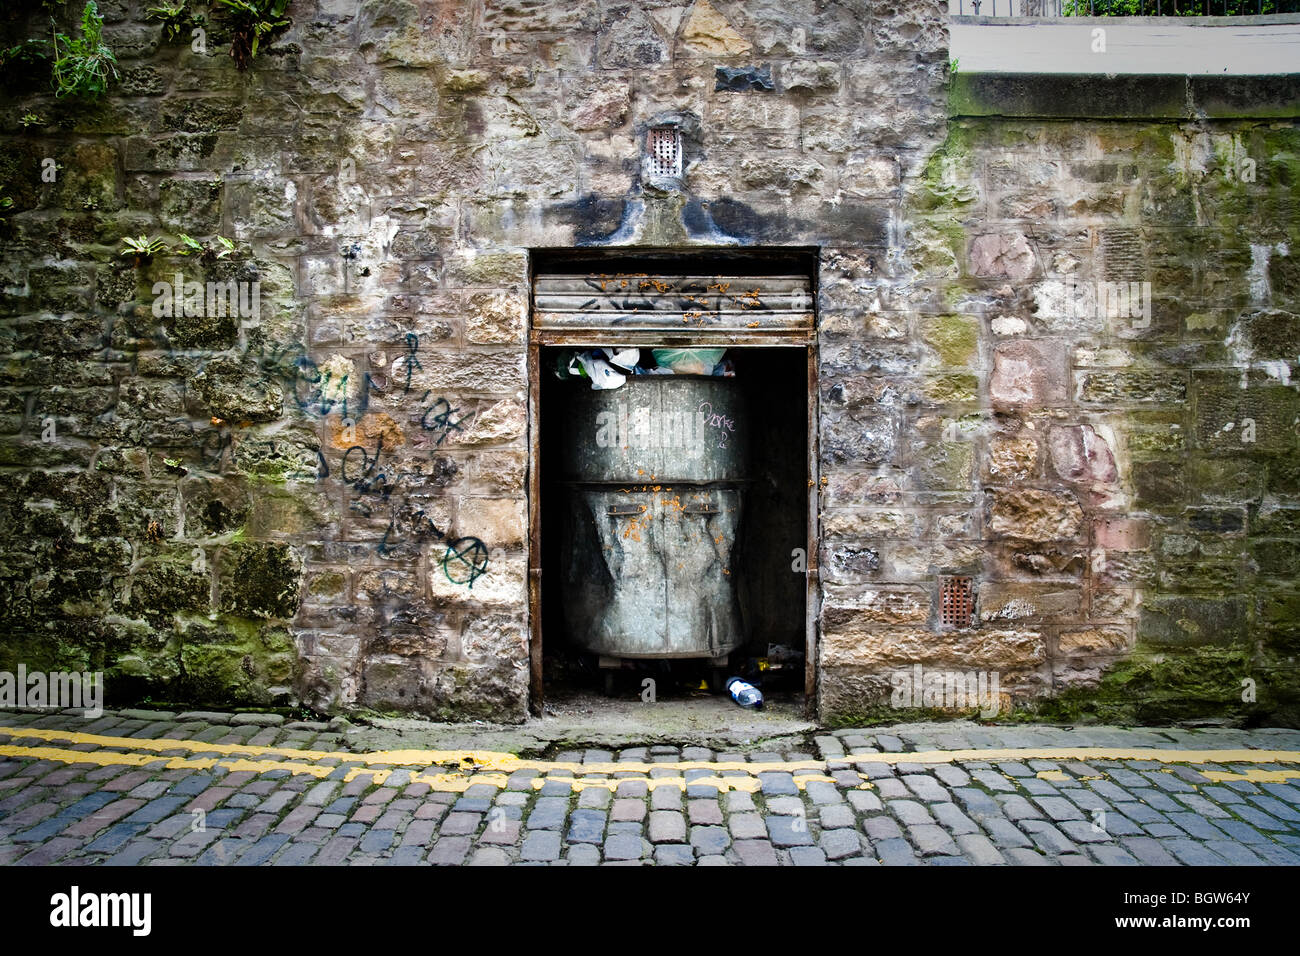 A metal bin in a recess within an old brick wall with a rusty metal shutter Stock Photo